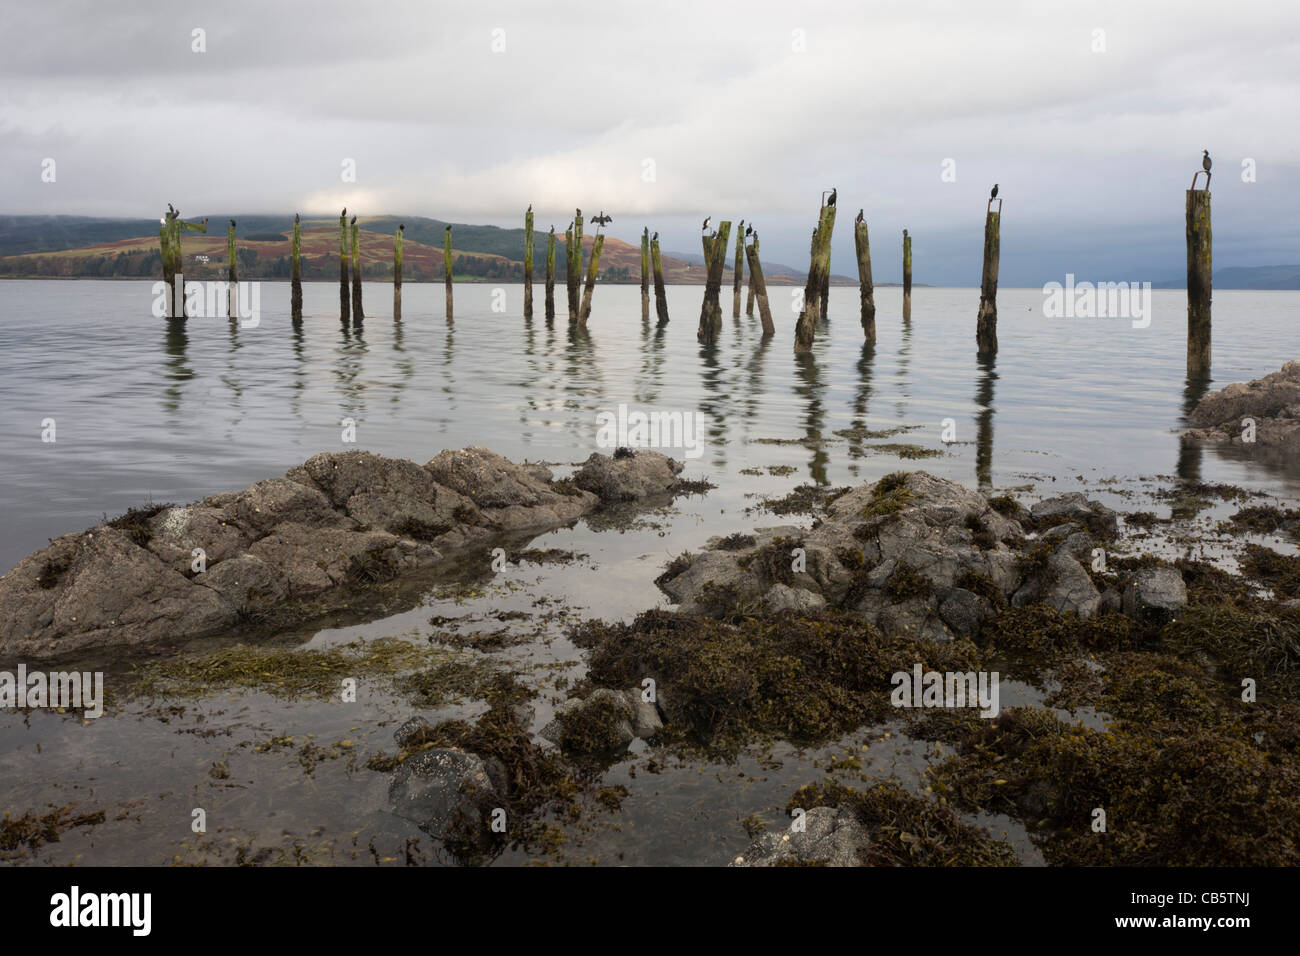 Gannets gather on disused wooden piles at old Salen Pier, Salen, Isle of Mull, Scotland. Stock Photo